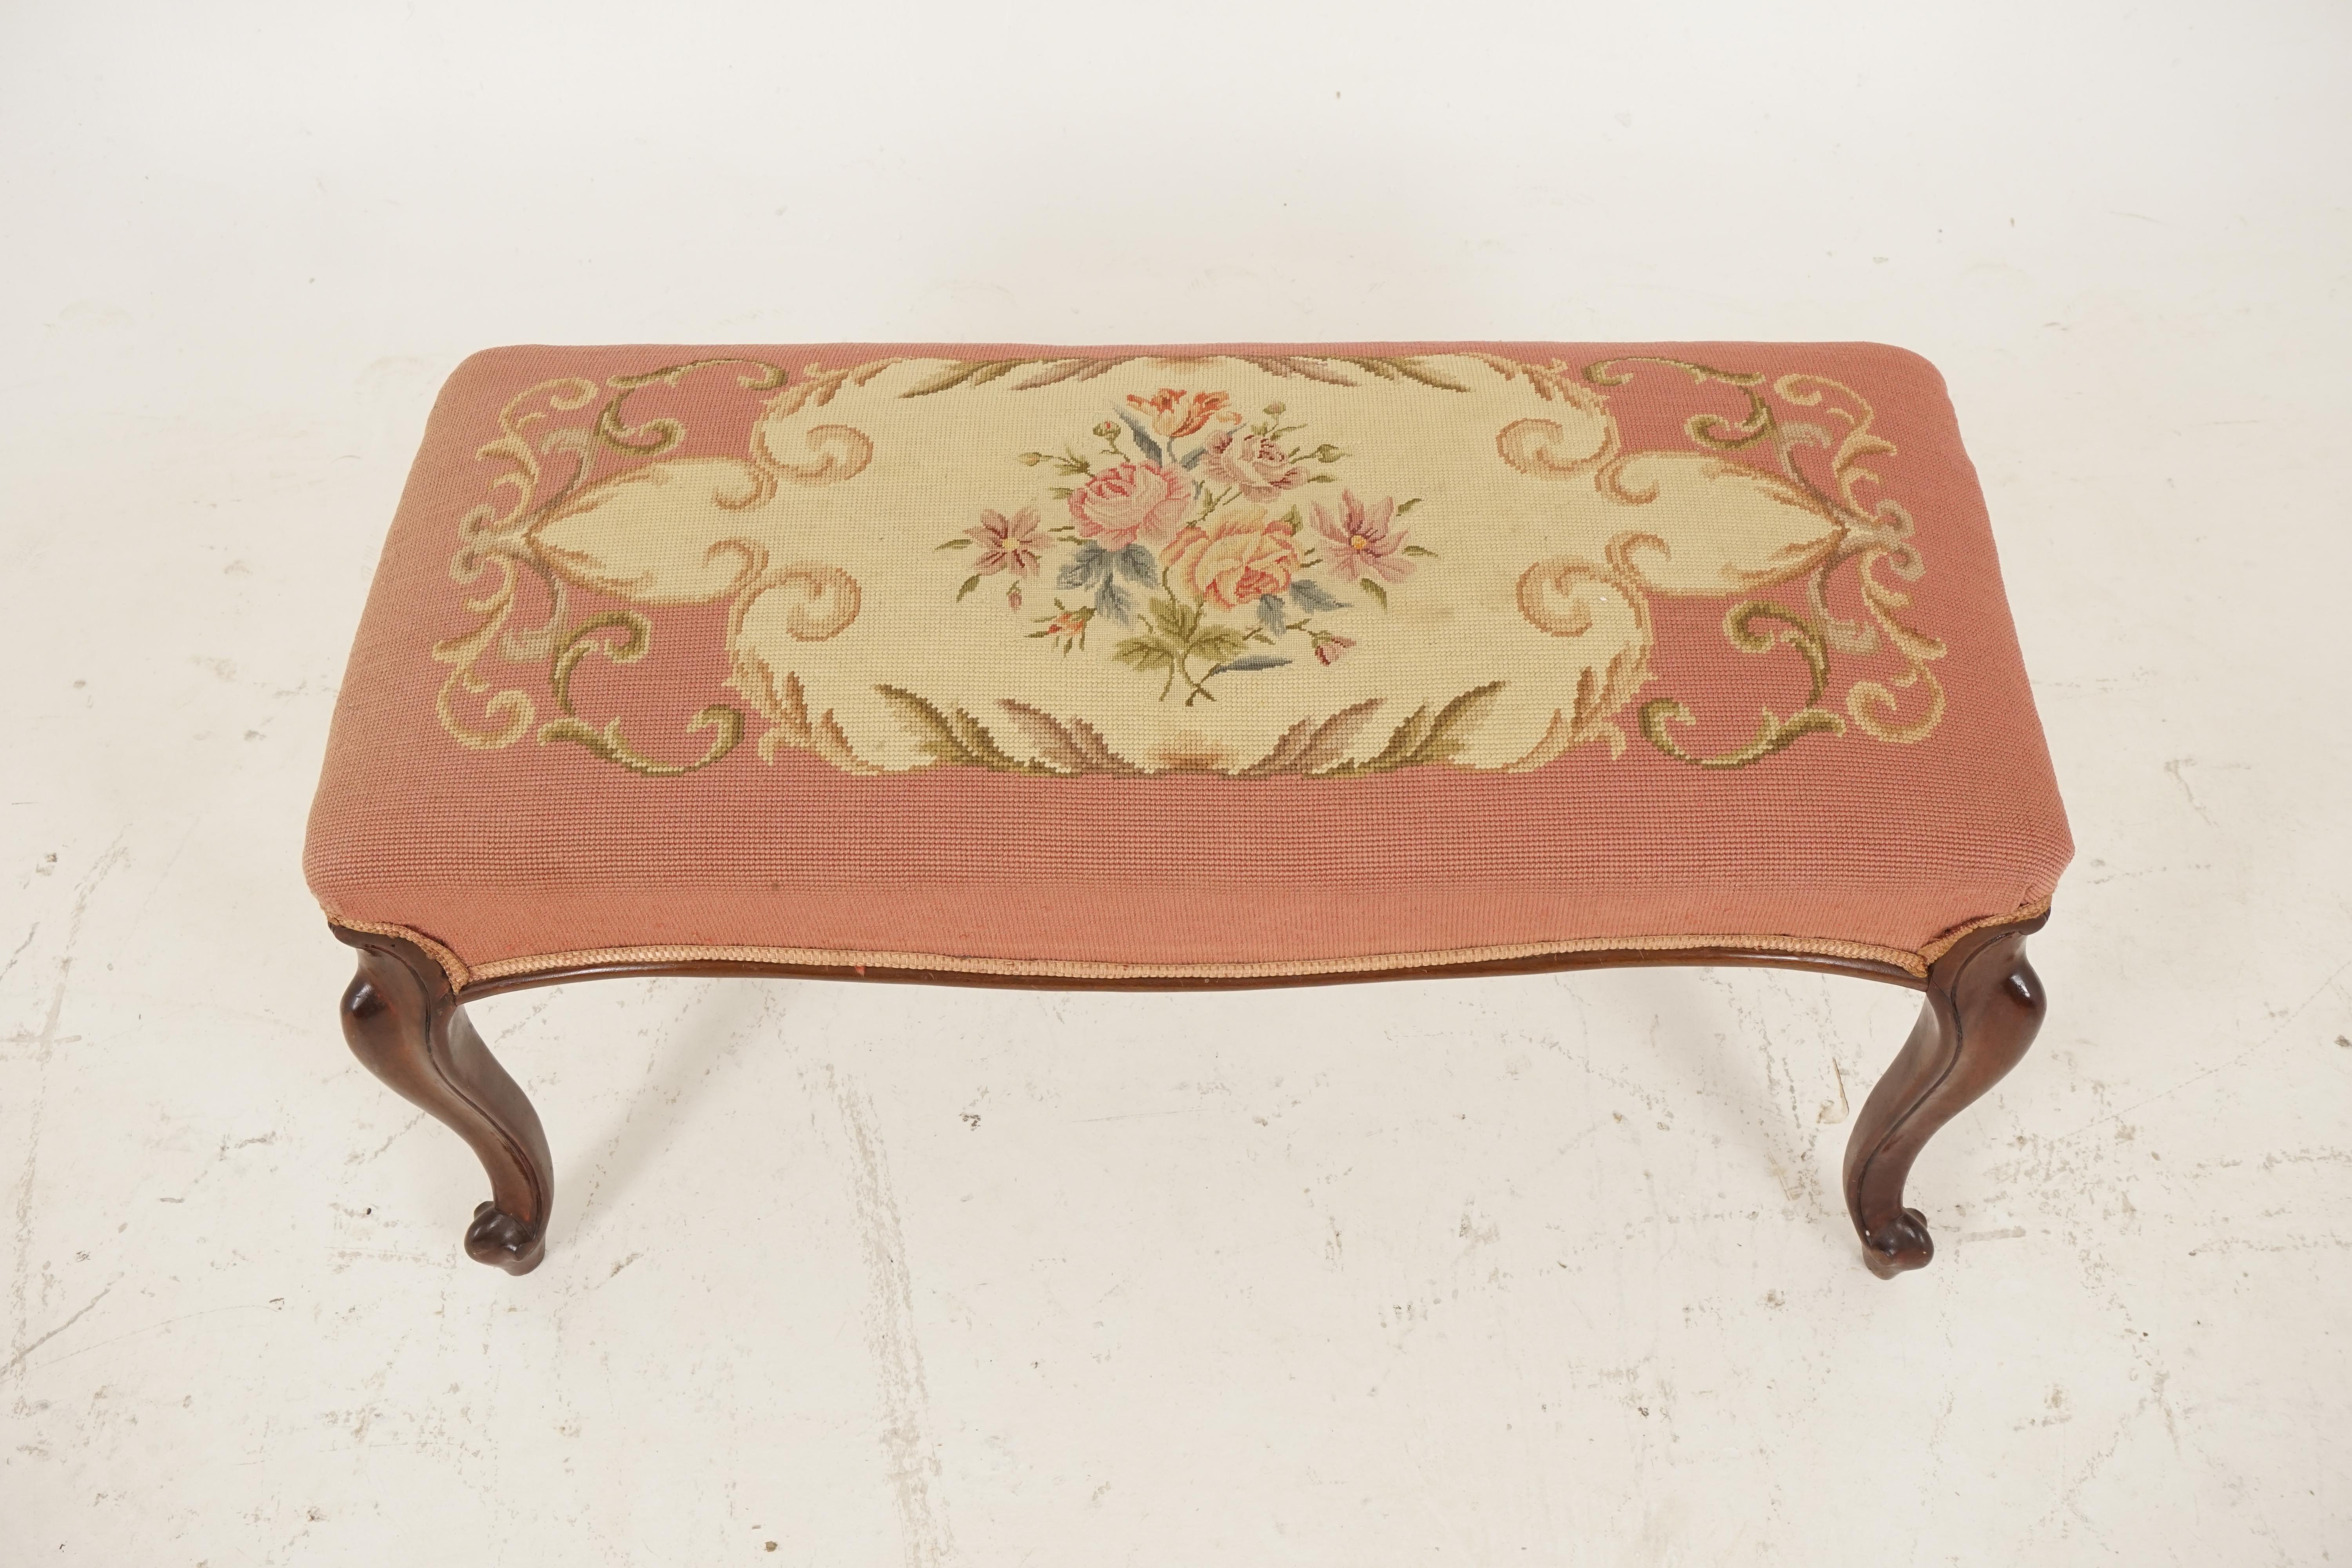 Antique Victorian Stool Bench, Mahogany Needlepoint Stool Bench, Scotland 1890, B2091

Scotland 1890
Solid Mahogany
Original Finish
Having A Floral Medallion In Pink Needlepoint Upholstery To A Moulded Frame
Raised On Four Cabriole Legs
Nice